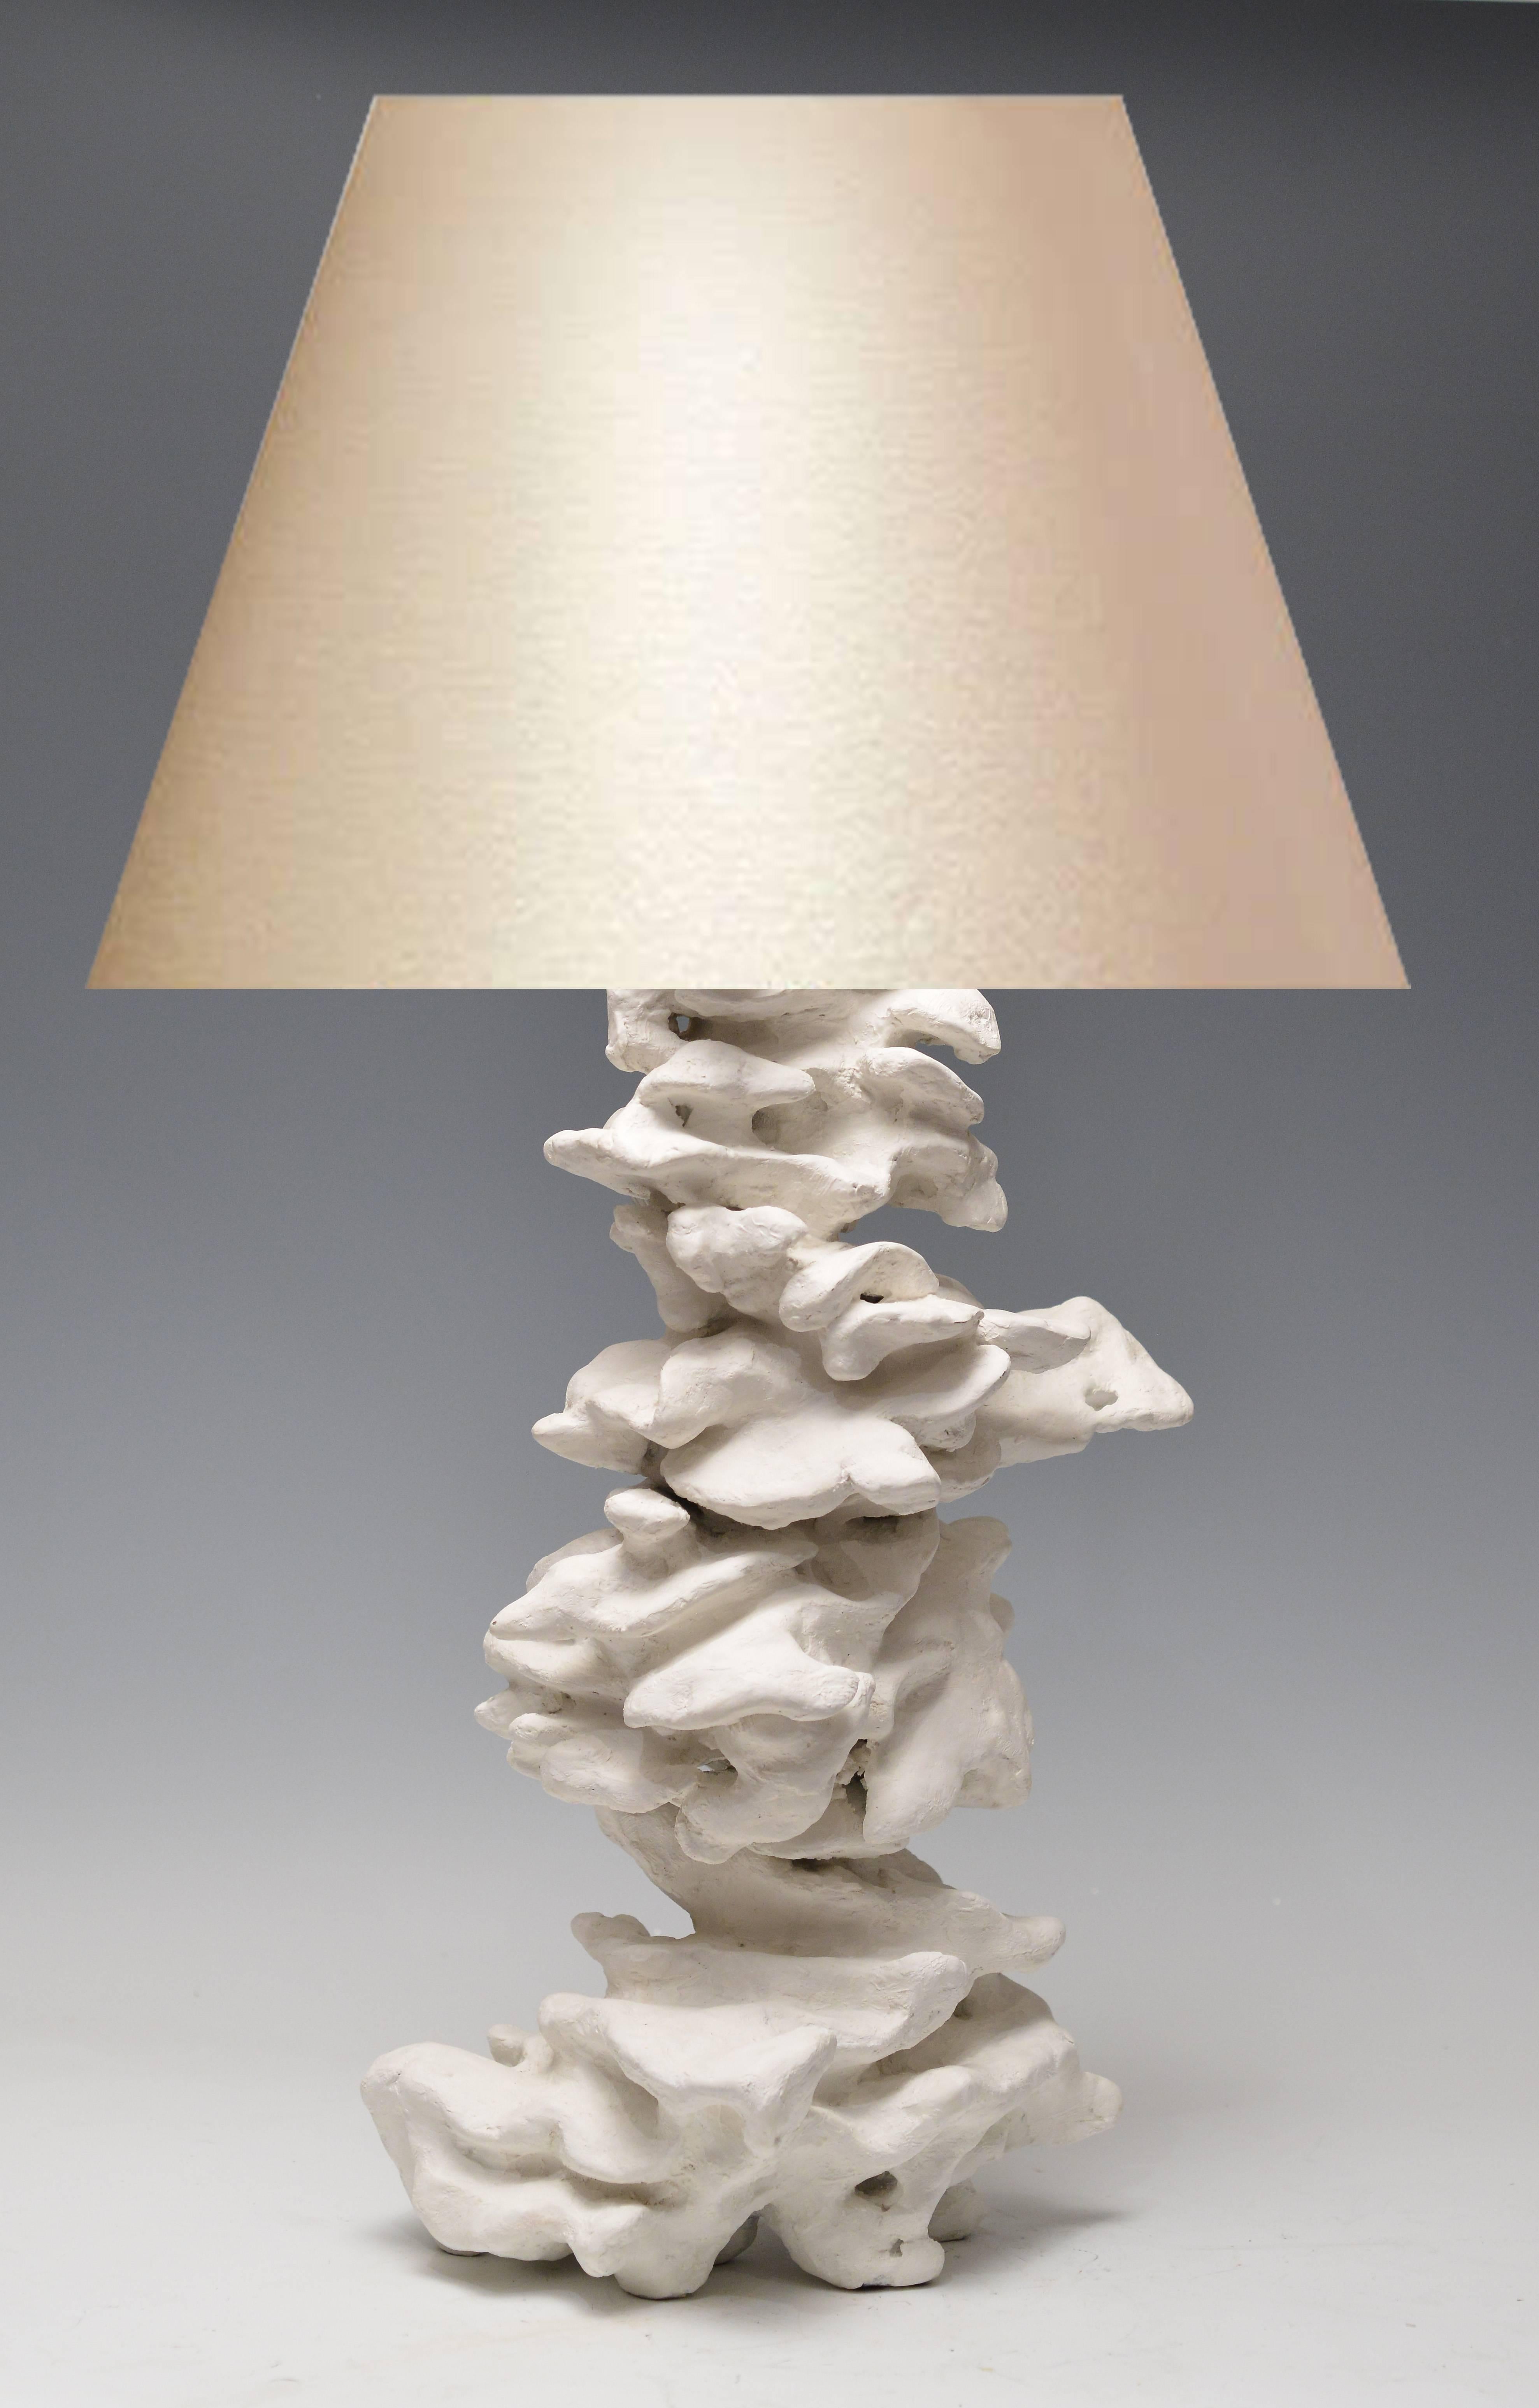 Handmade vertical rock with plaster surface, grottoes and overhang. Inspired from the natural rock.
(Lampshade not included).to the top of the sculpture 19.5 inch